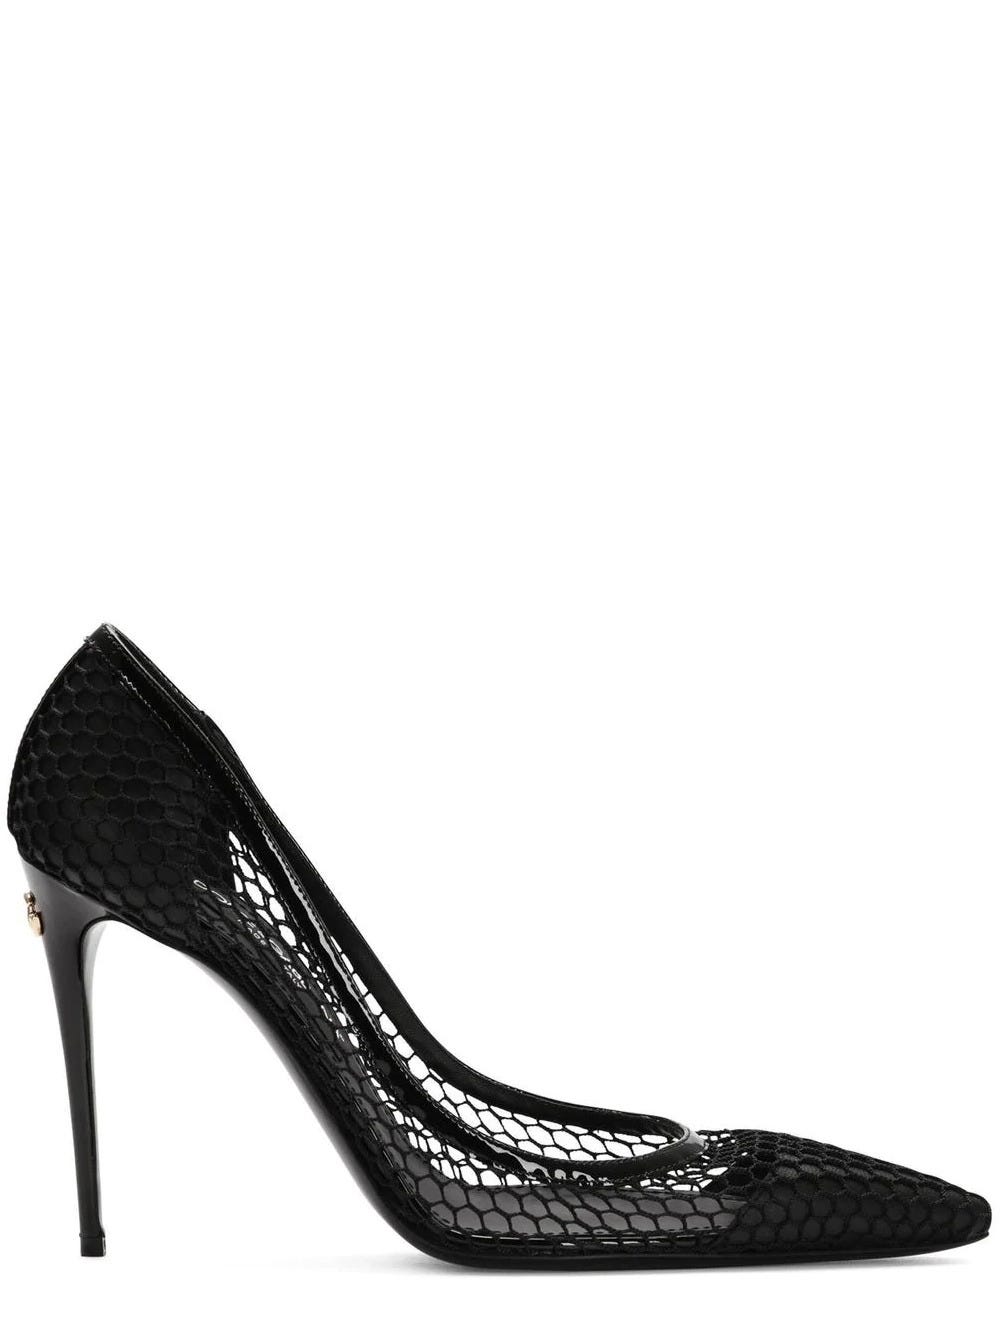 DOLCE & GABBANA BLACK PUMPS WITH MESH DETAIL AND LOGO PLAQUE